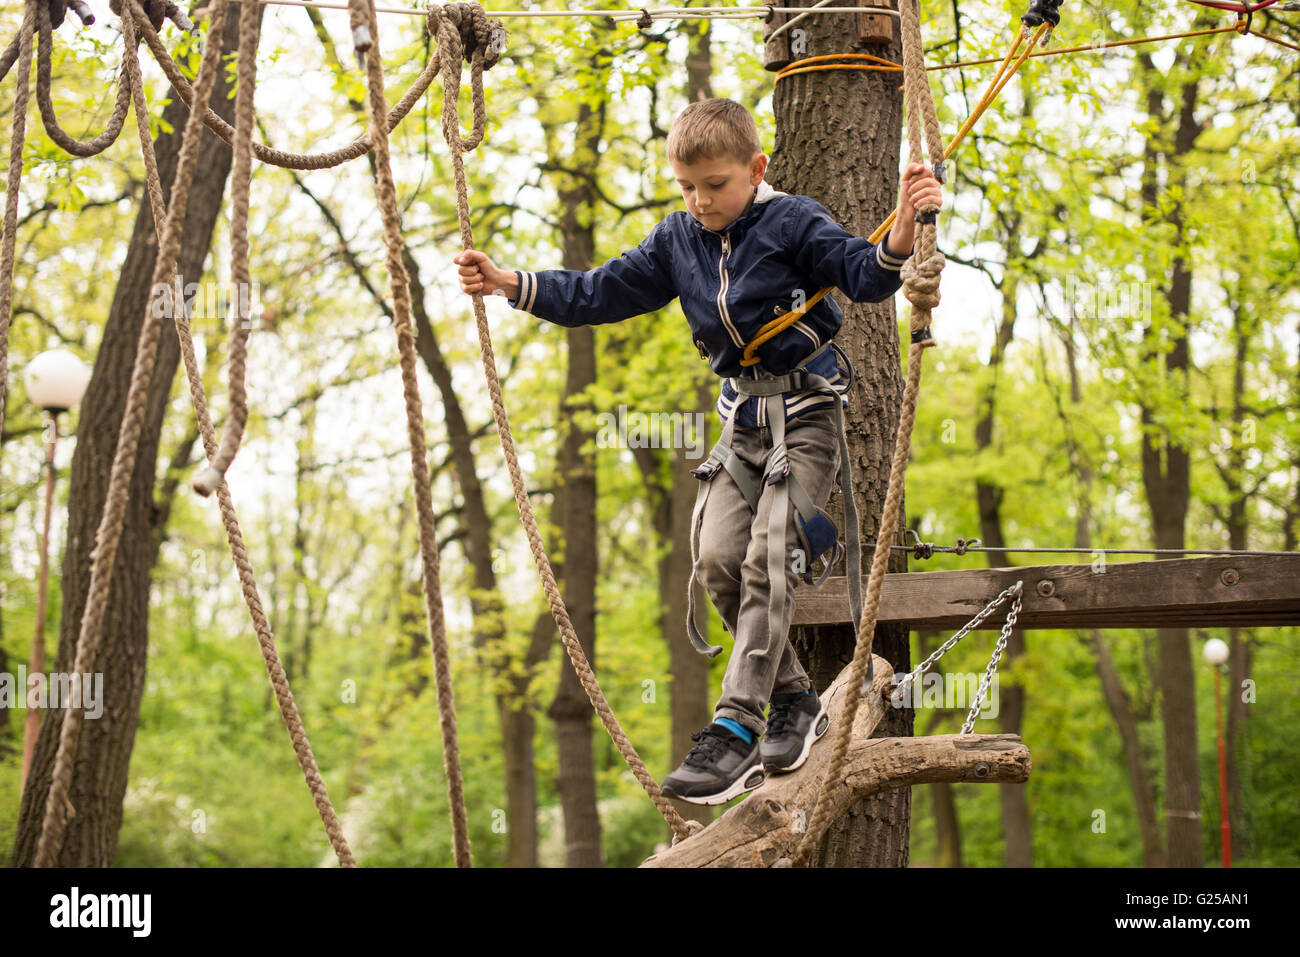 Boy in rope harness on climbing platform in tree in adventure park Stock Photo